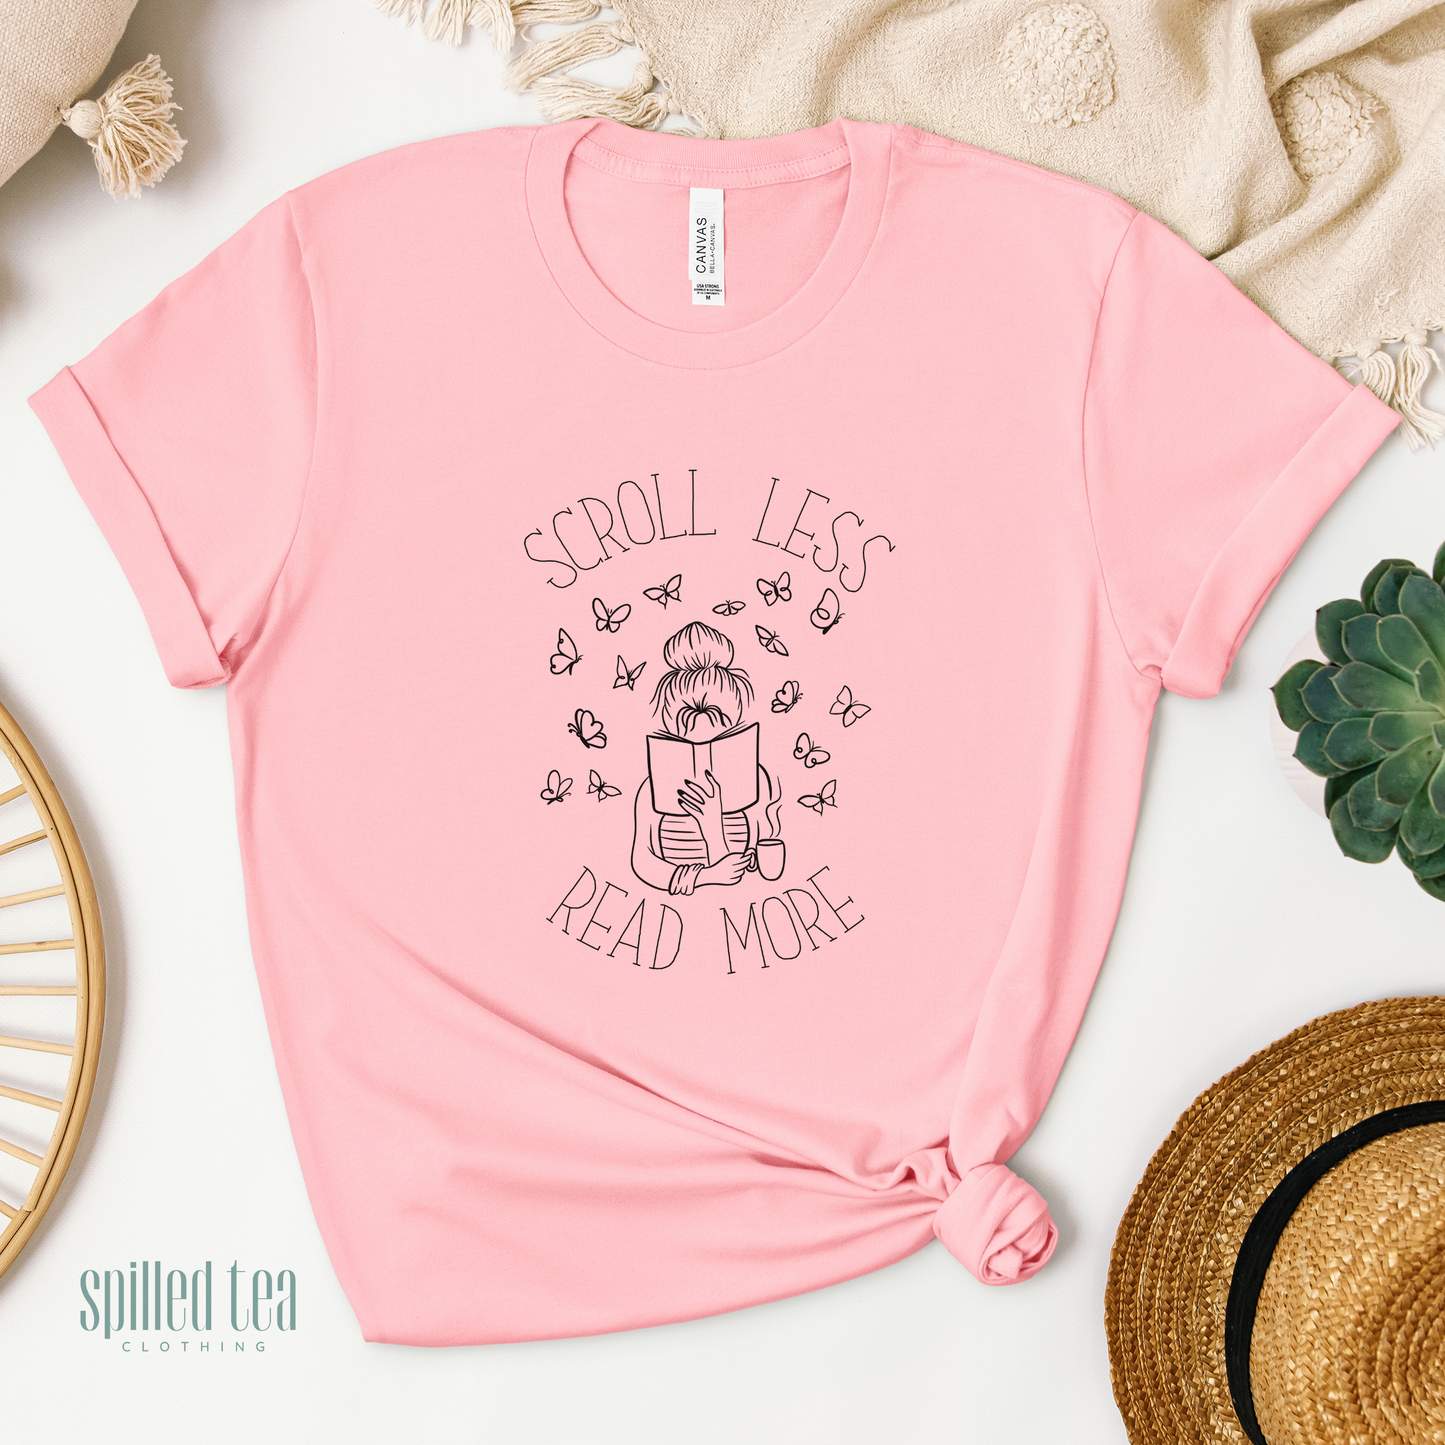 Scroll Less, Read More T-Shirt